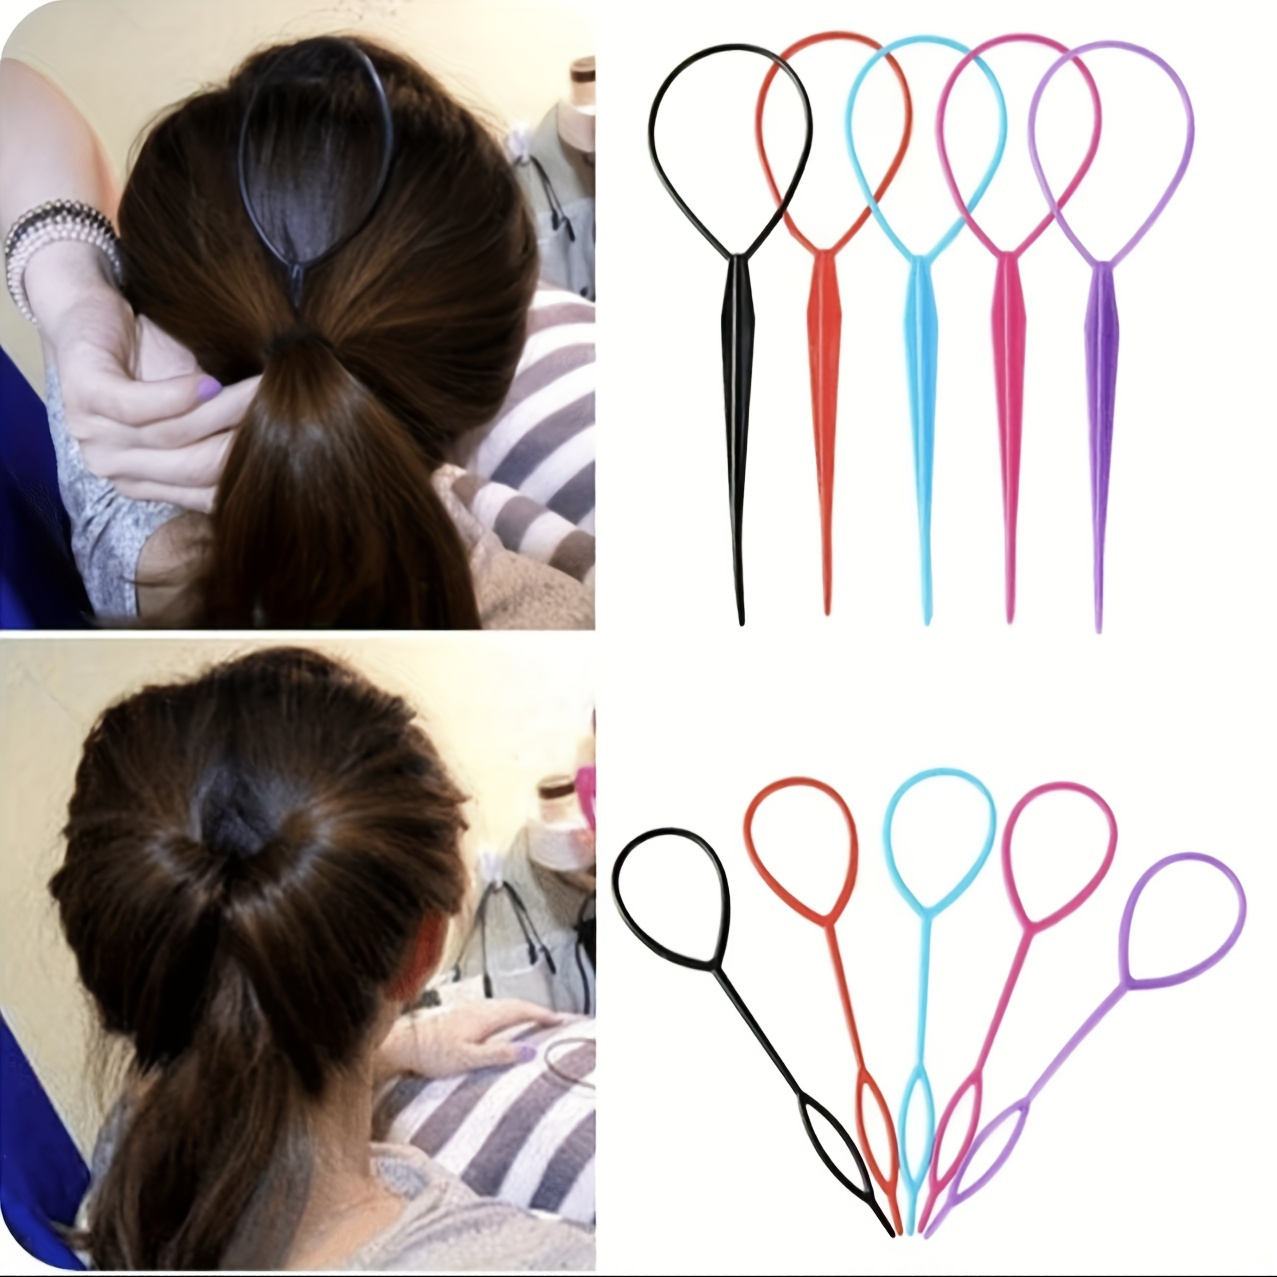 

Topsy Tail Hair Braided Ponytail Maker, Hair Tail Tools, French Braid Tool Loop For Hair Styling